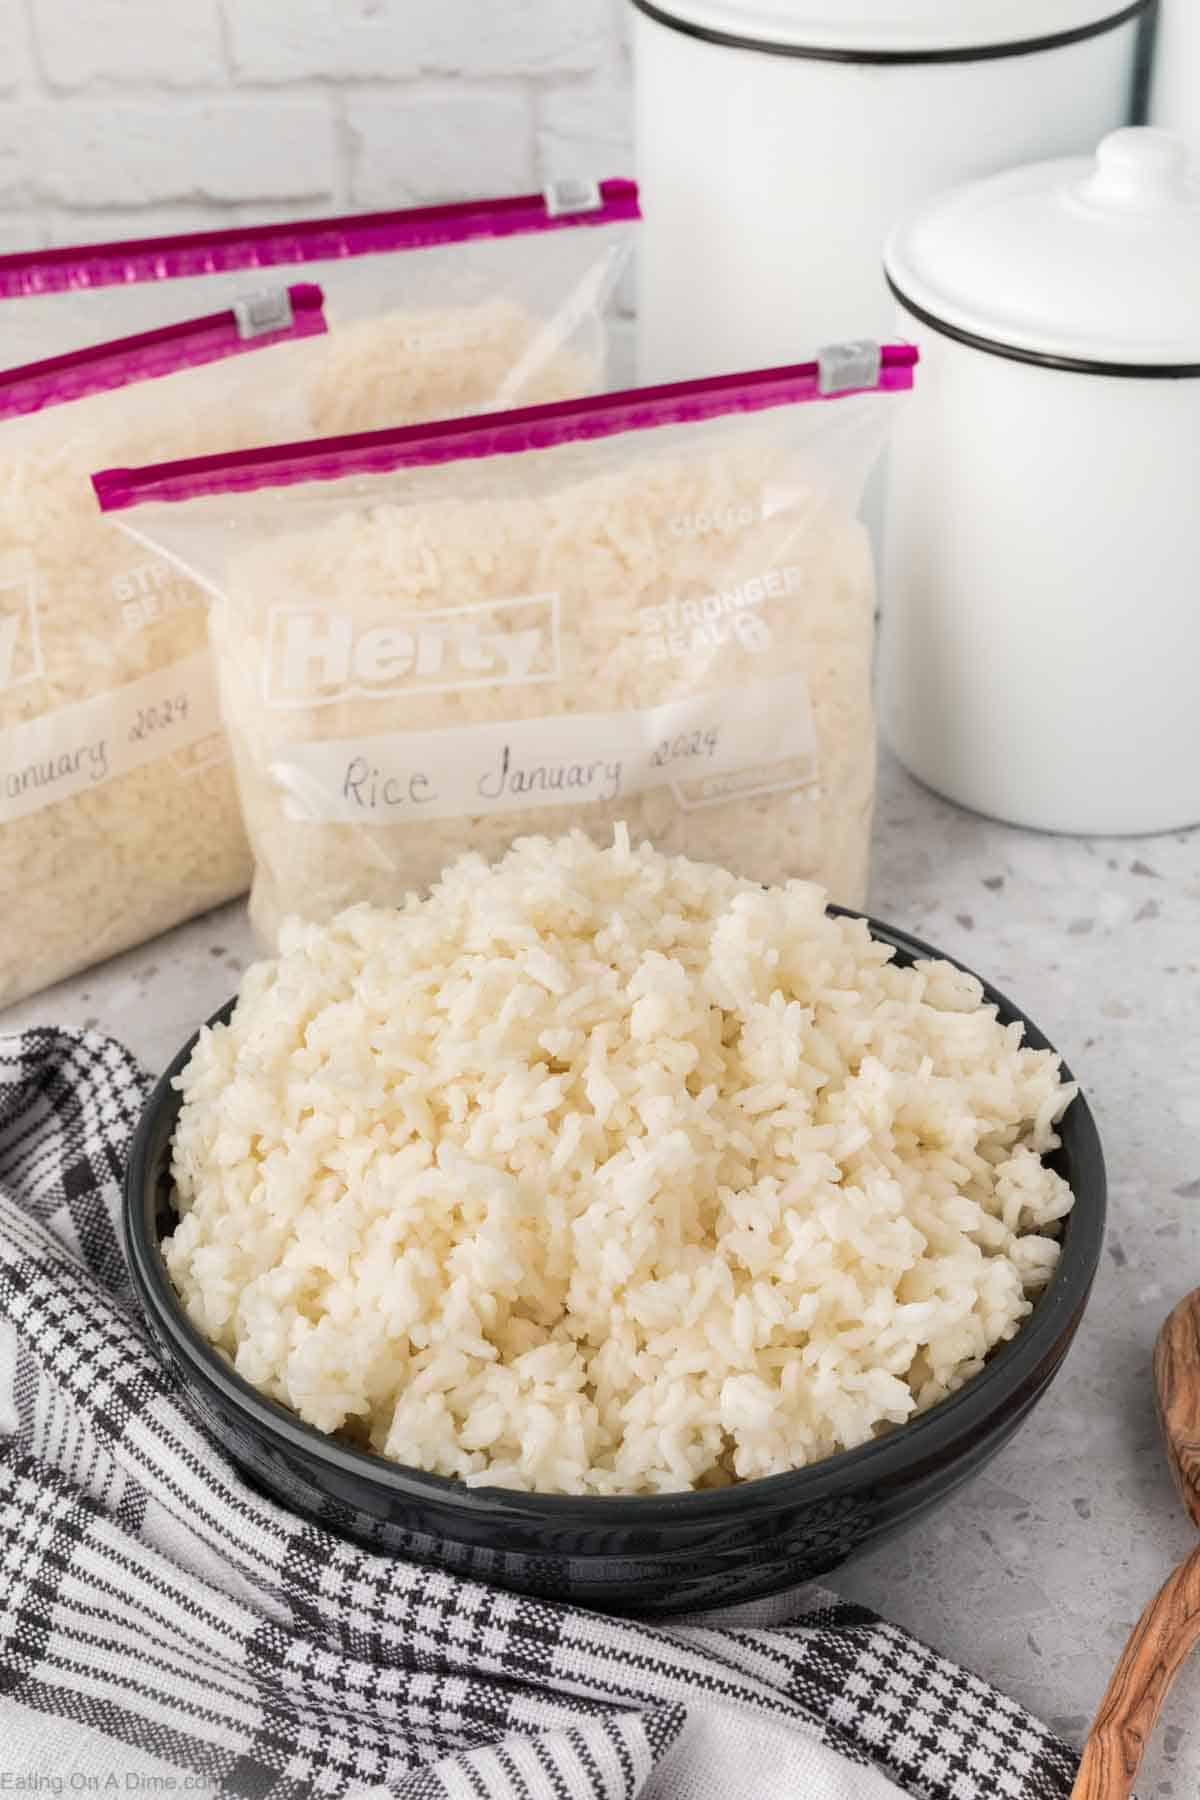 Freezer Ziplock Bags with cooked rice with a bowl of cooked rice